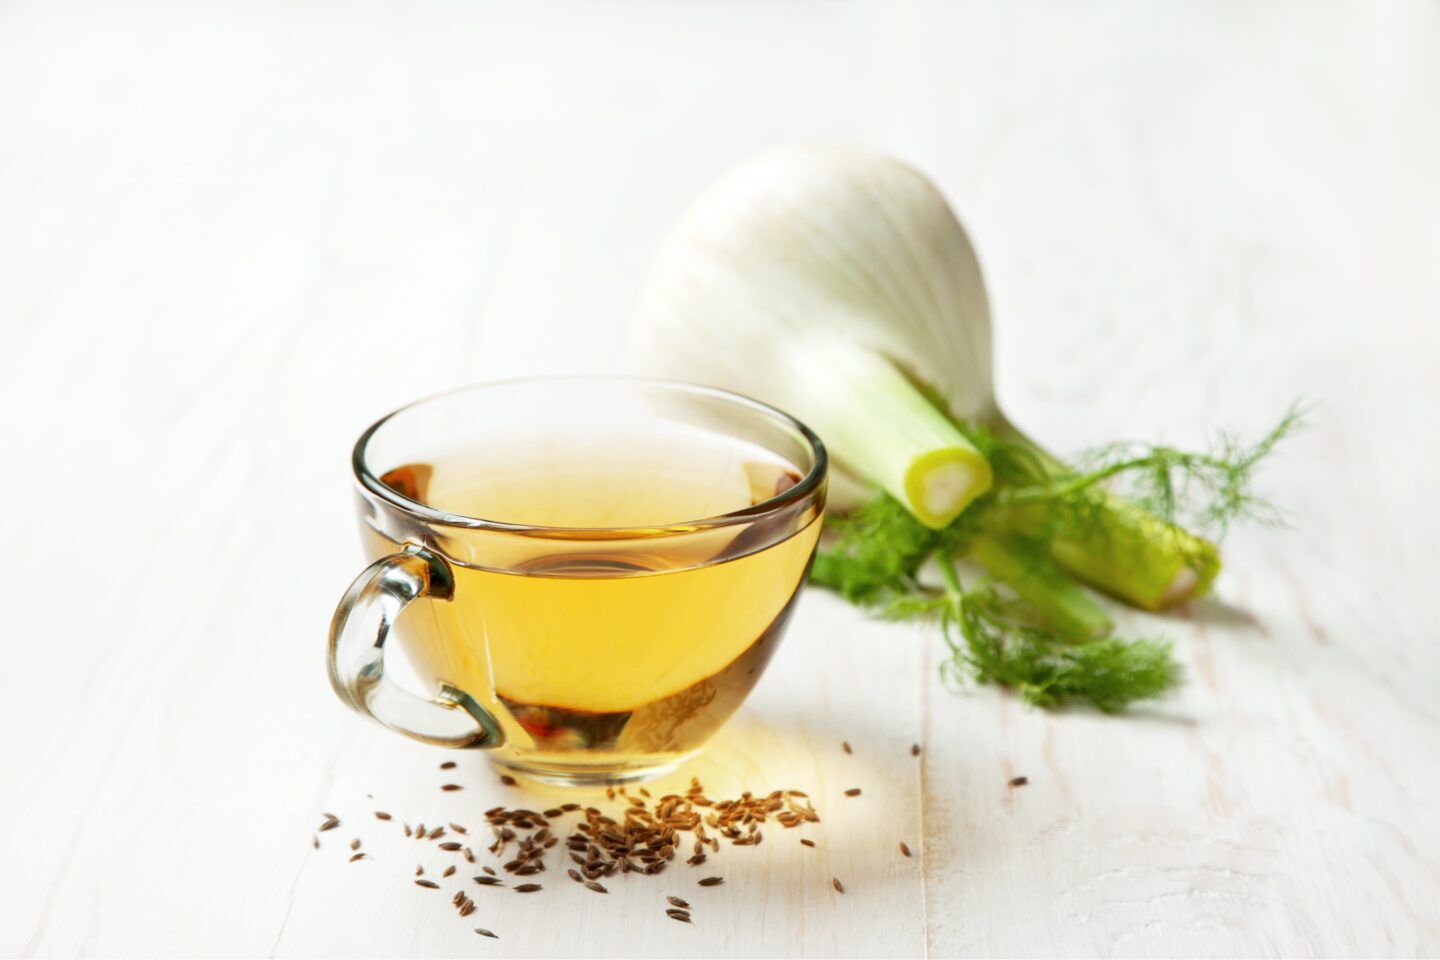 fennel tea with seeds and bulb